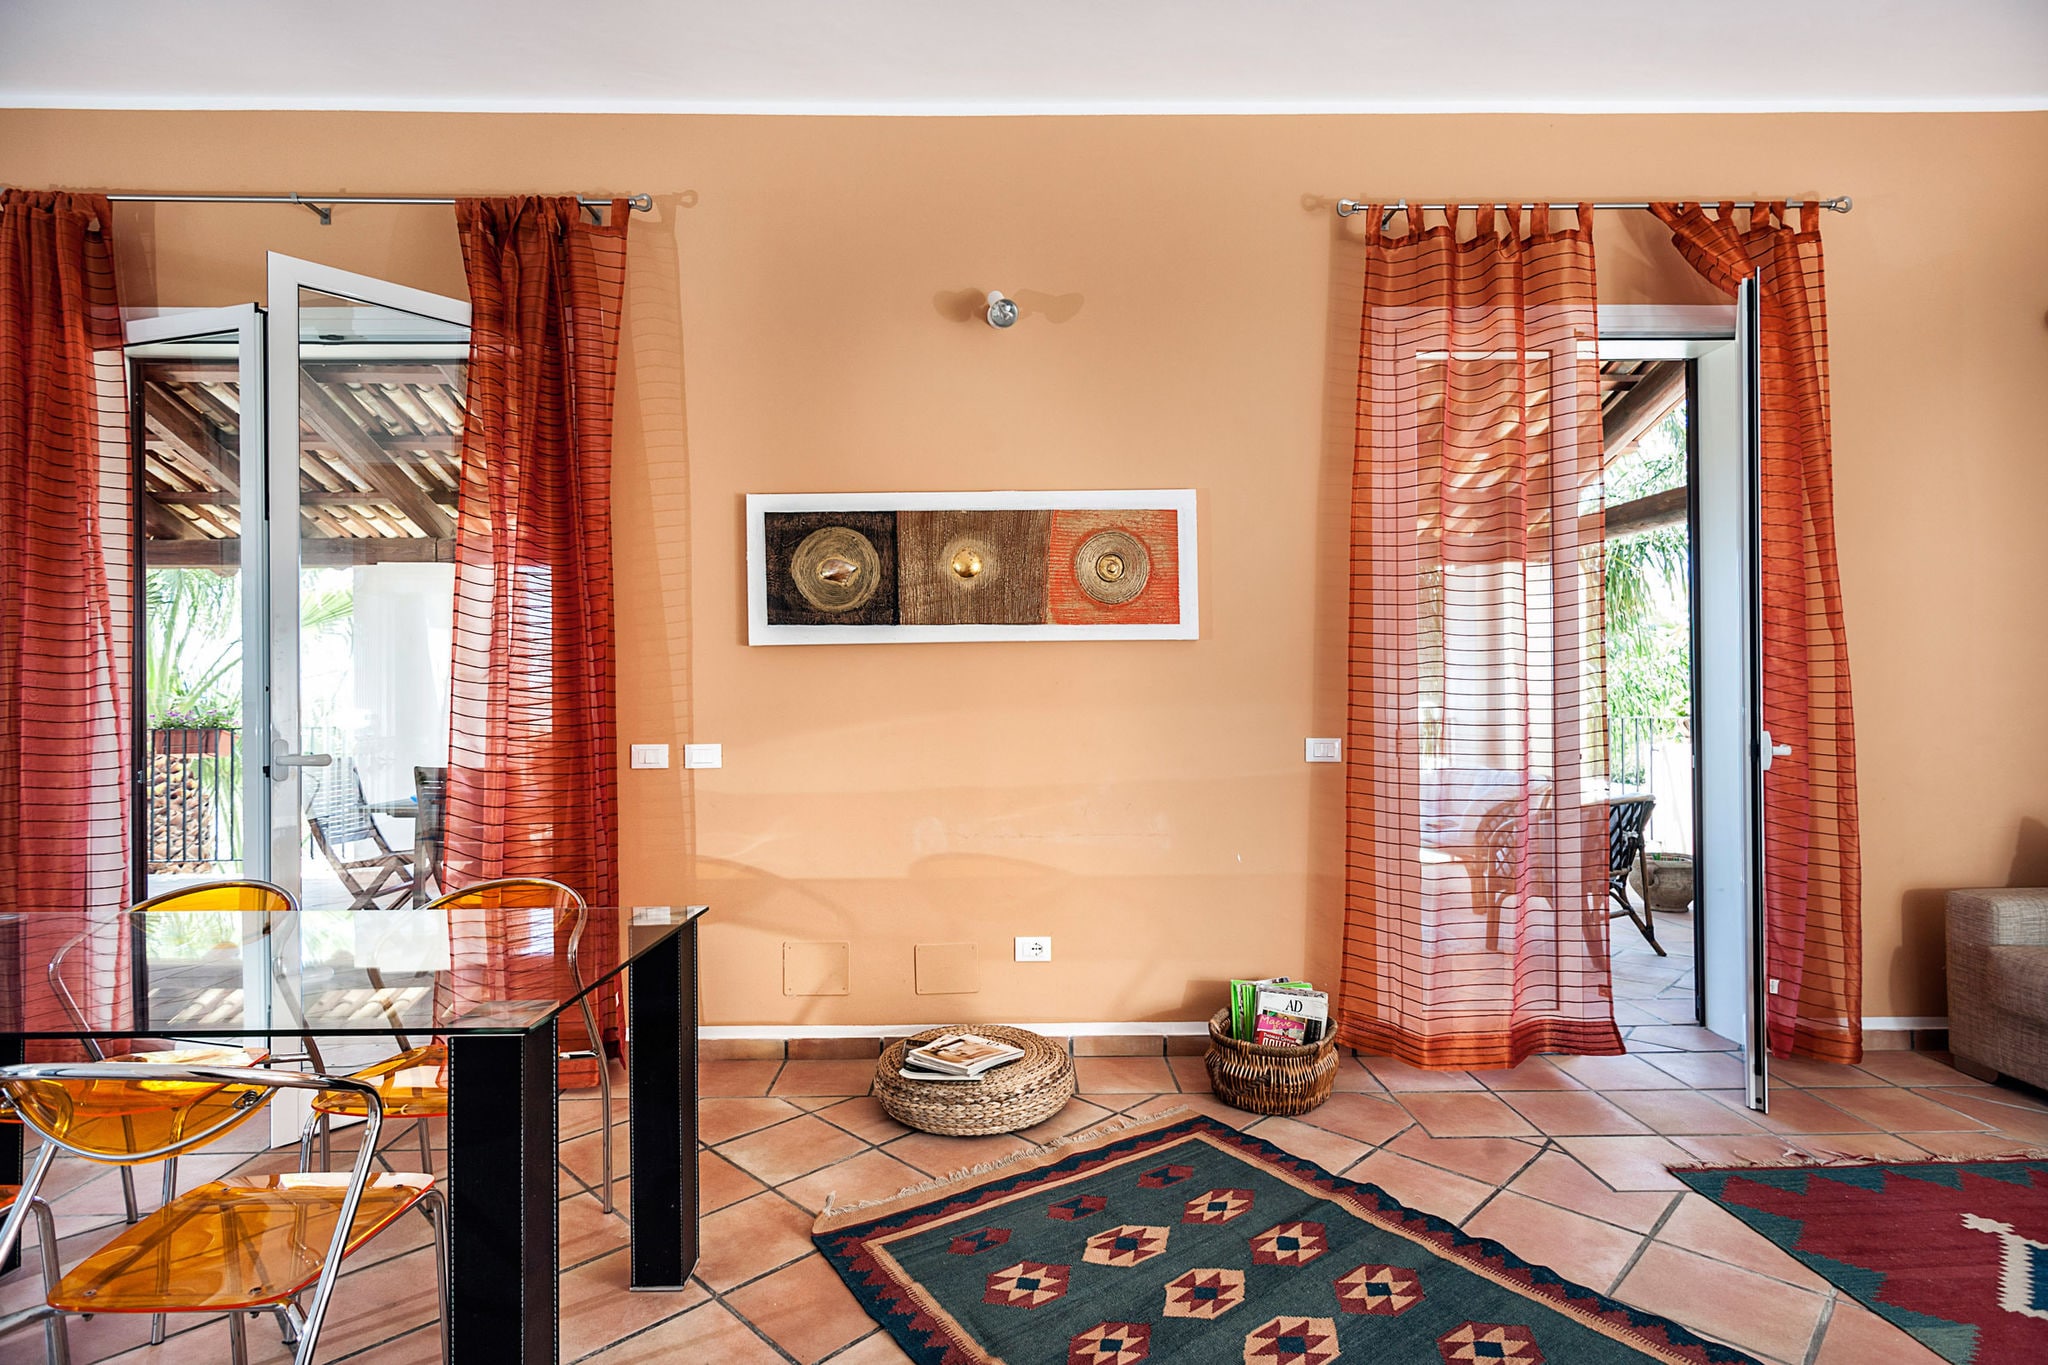 Elegant flat in villa with pool and garden, just a few kilometres from the sea!